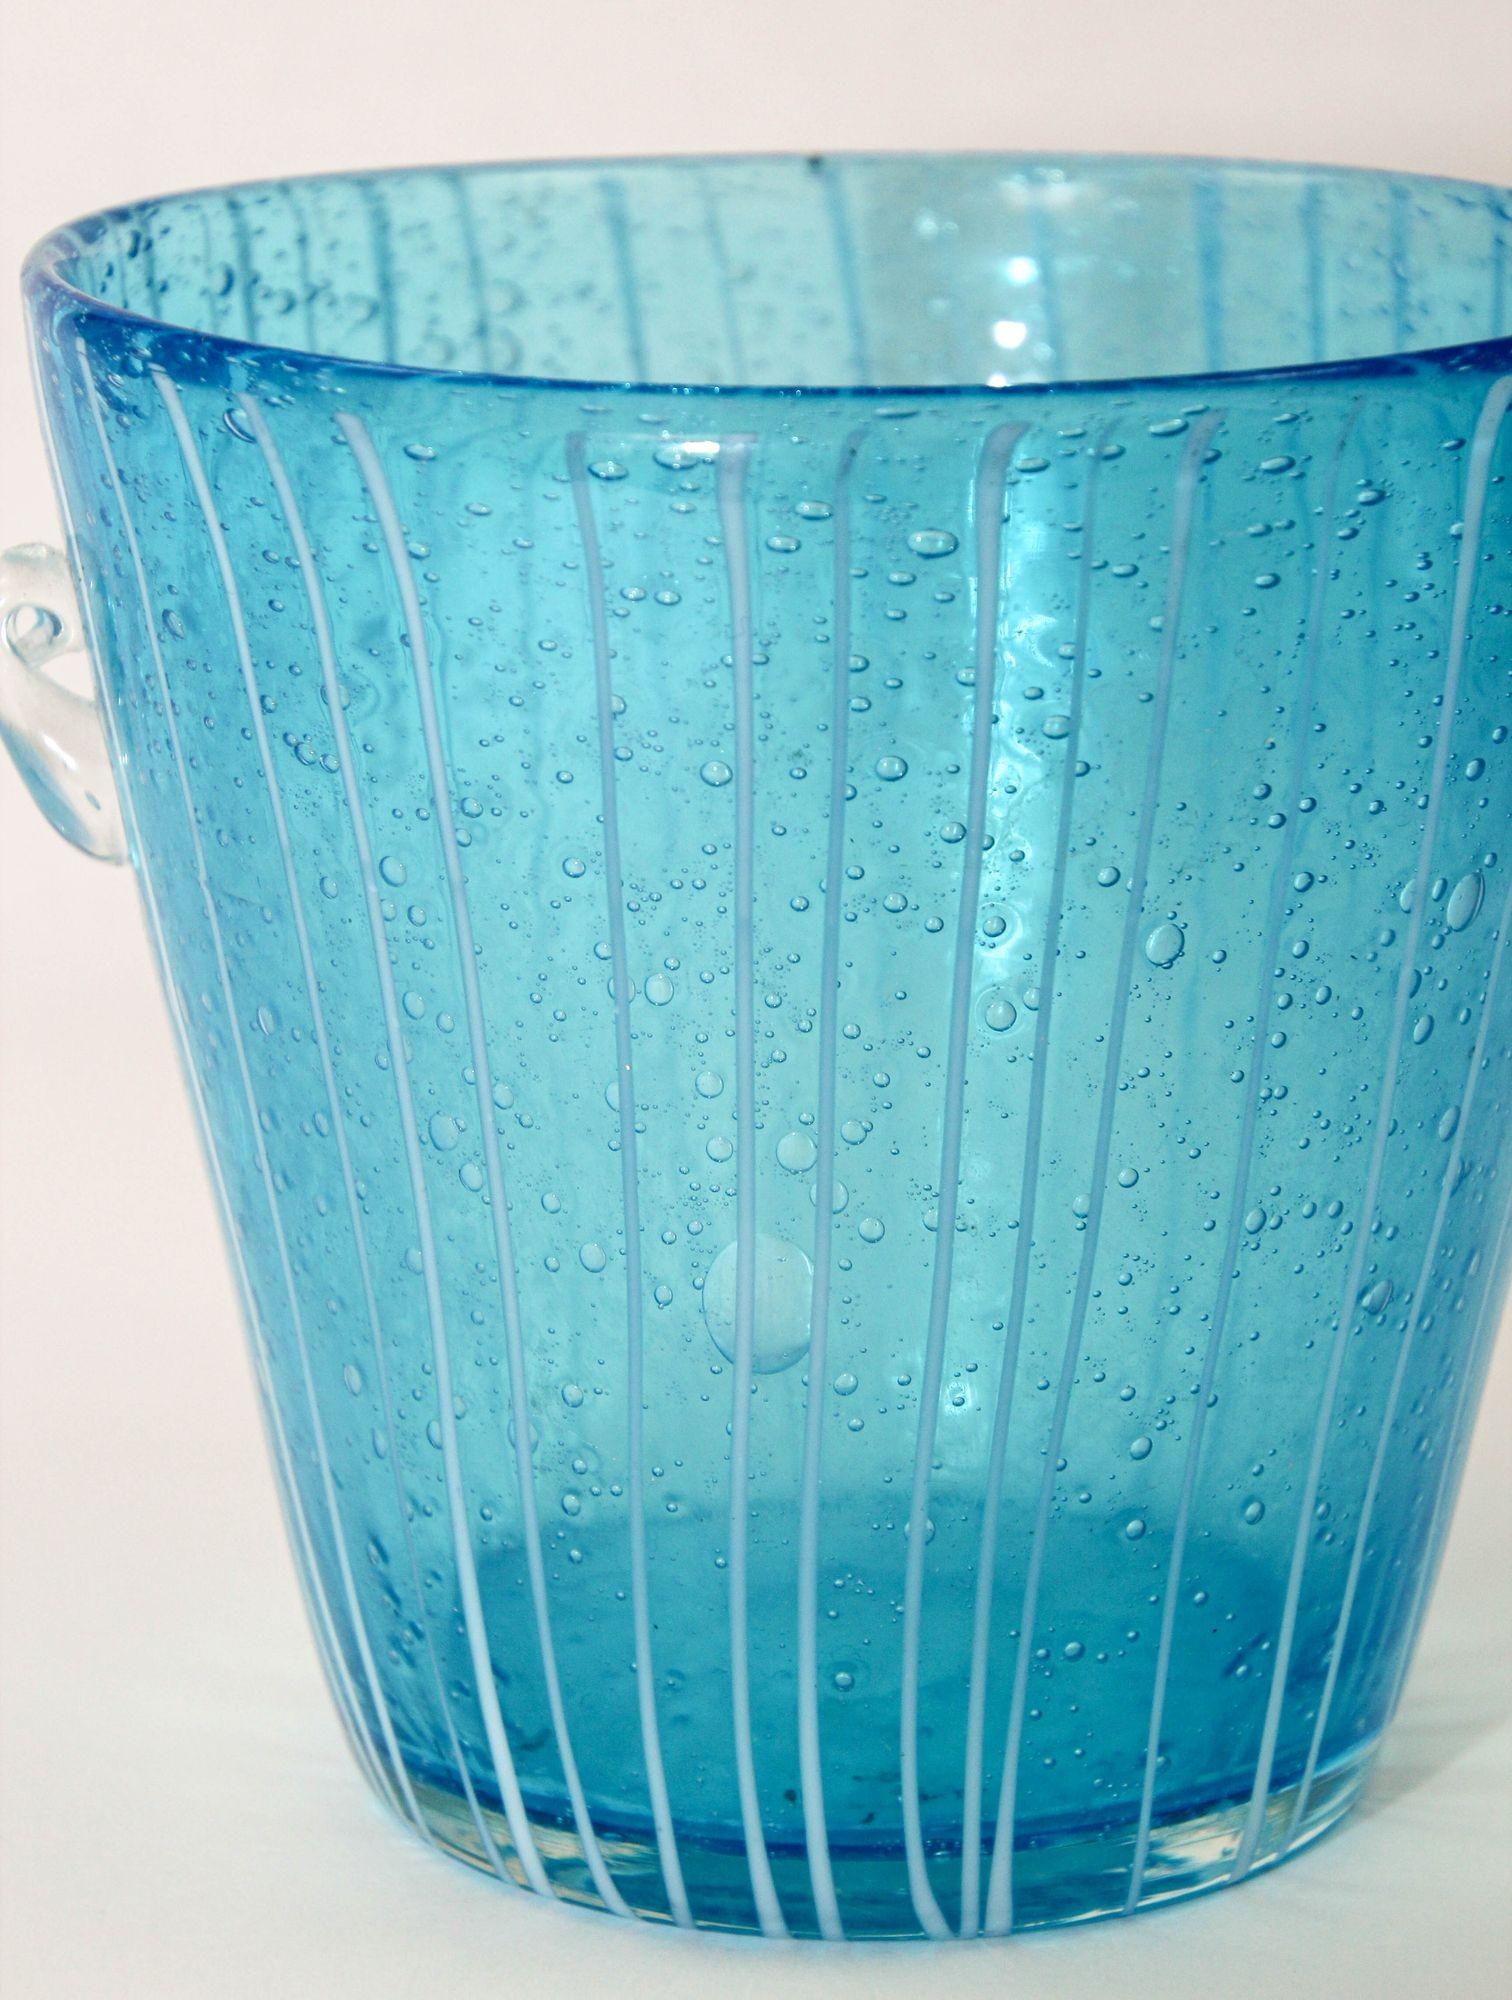 1980s Vintage Venini Murano Light Blue White and Clear crystal Wine Cooler Ice Bucket Made in Italy.
handcrafted Italian Murano Venini venetian art glass ice bucket .
This is a delicate blown Murano crystal blown glass ice bucket.
It has a flared